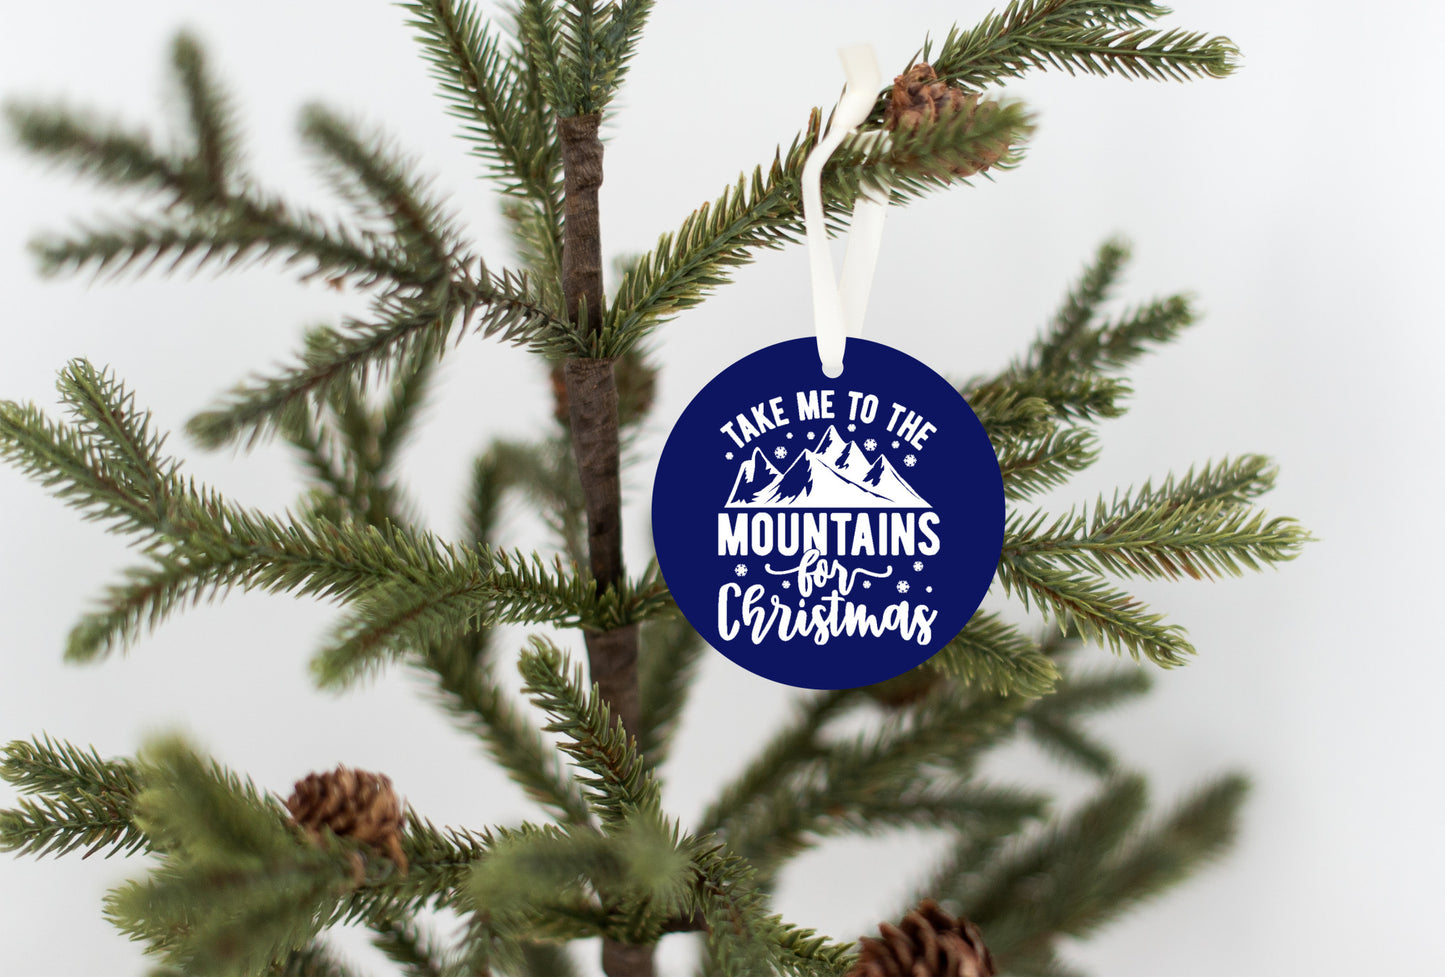 Take Me to the Mountains for Christmas Ornament